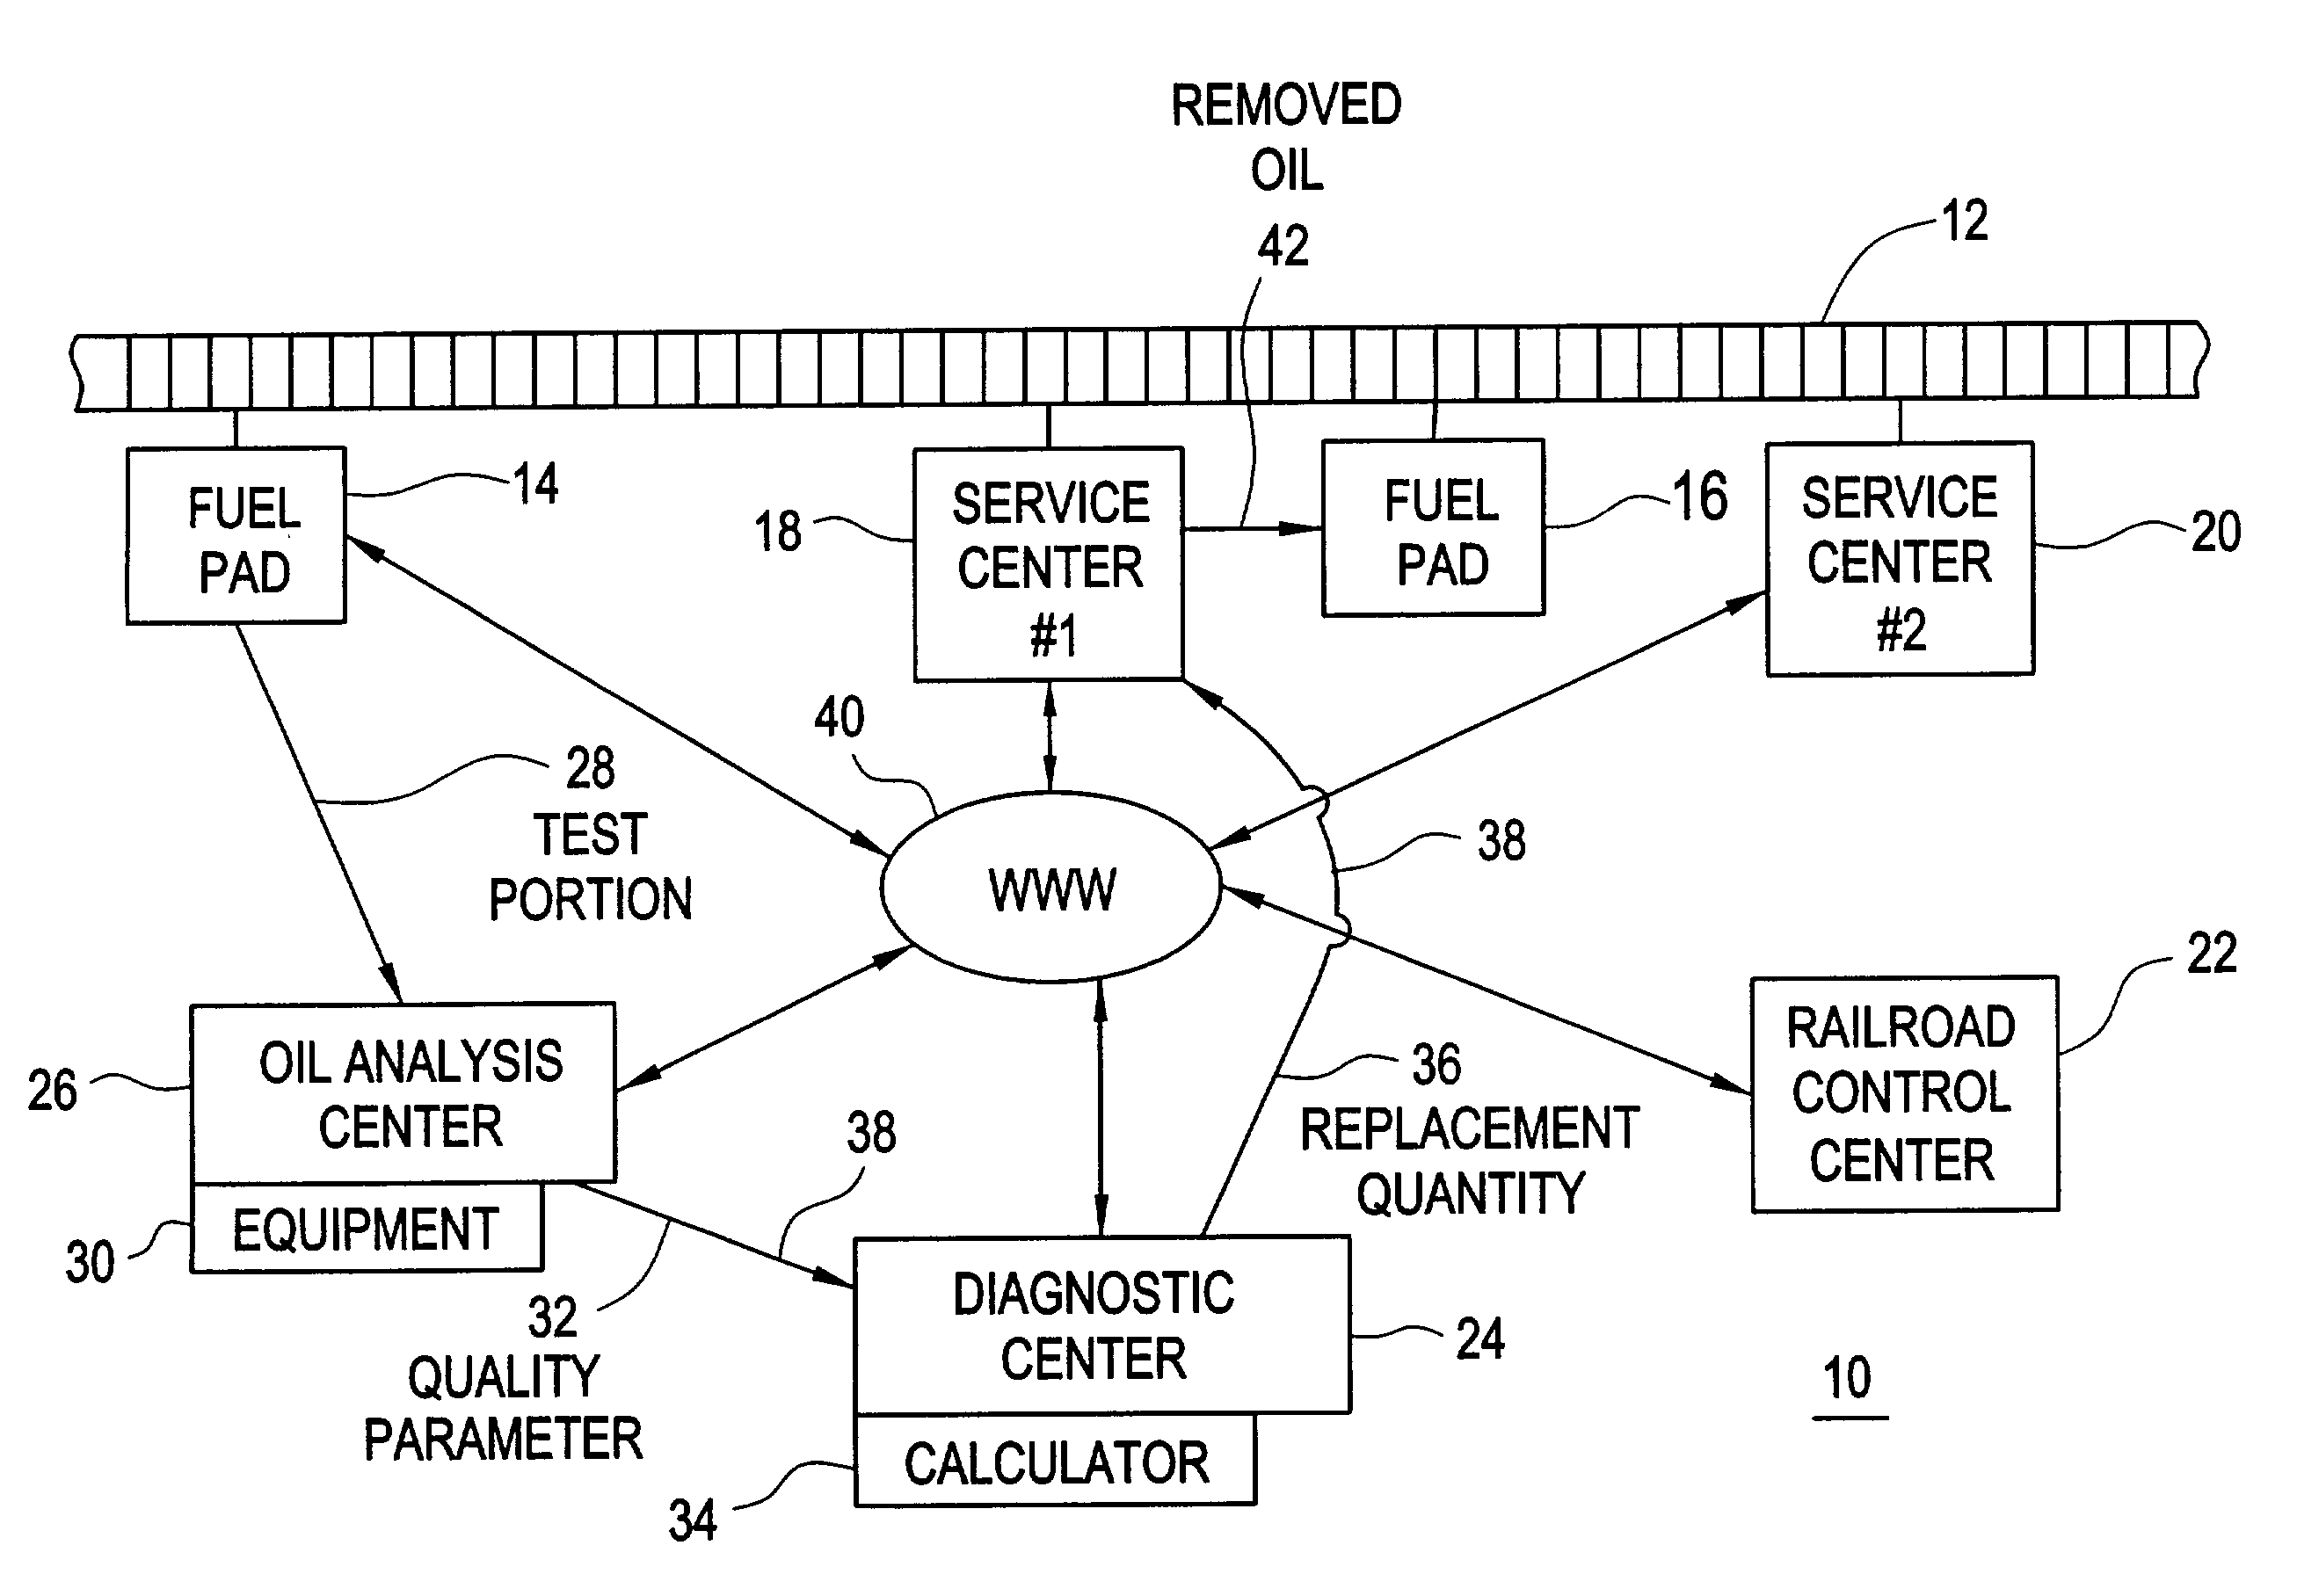 Lubricant management method for a vehicle